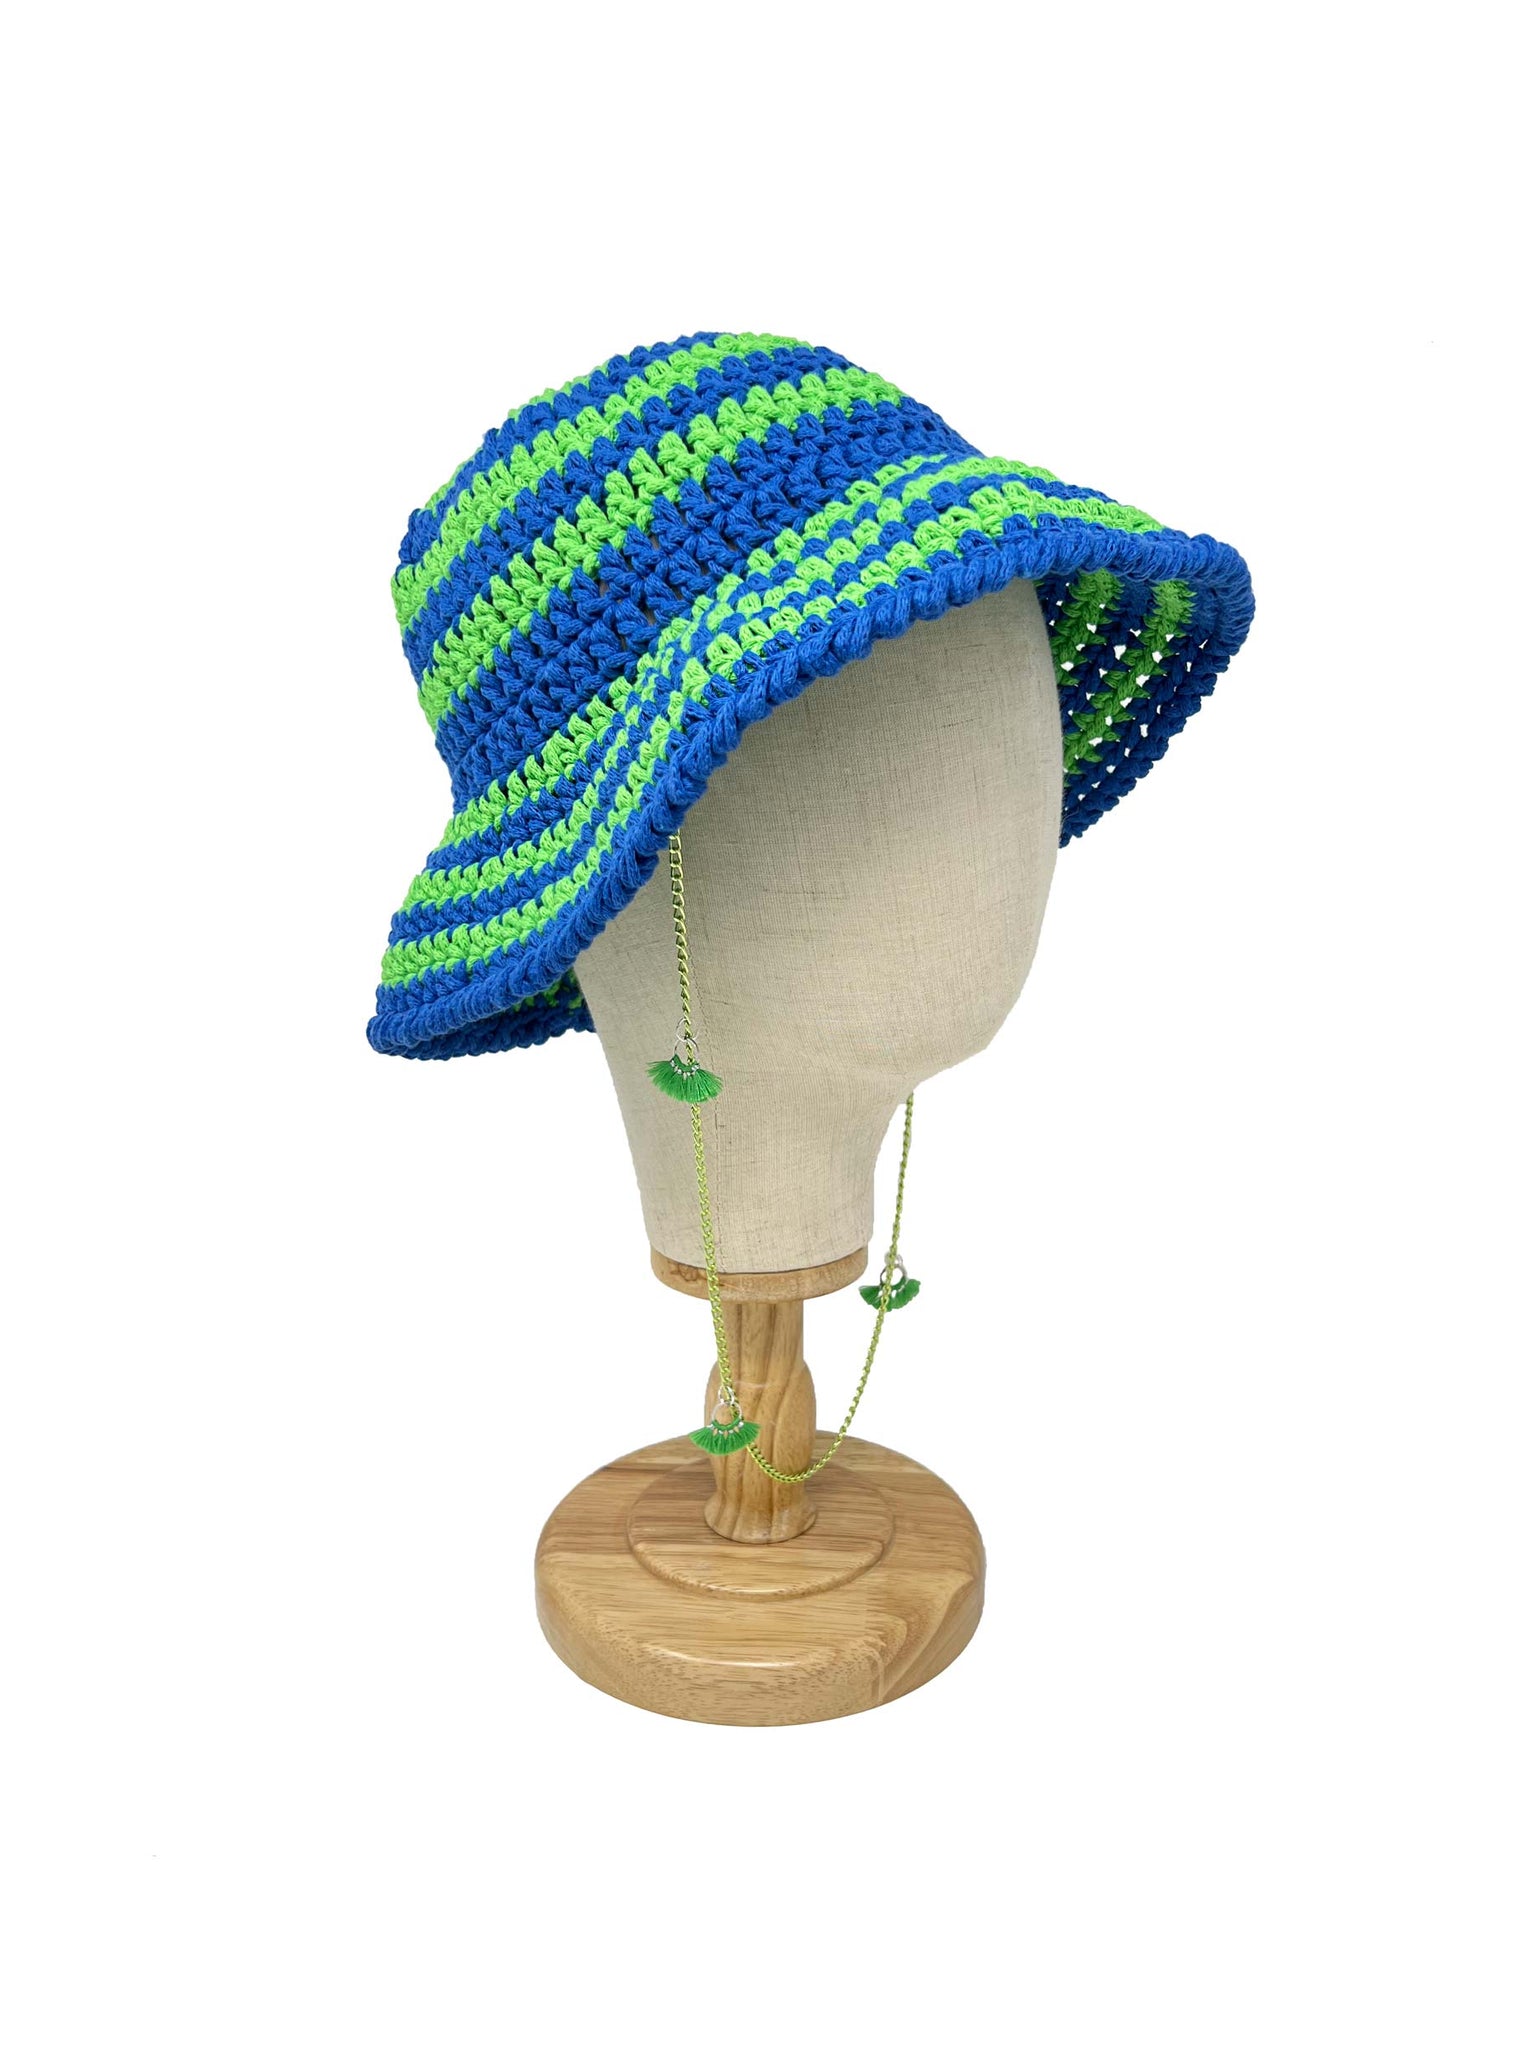 Blue and green striped crocheted bucket hat with chain